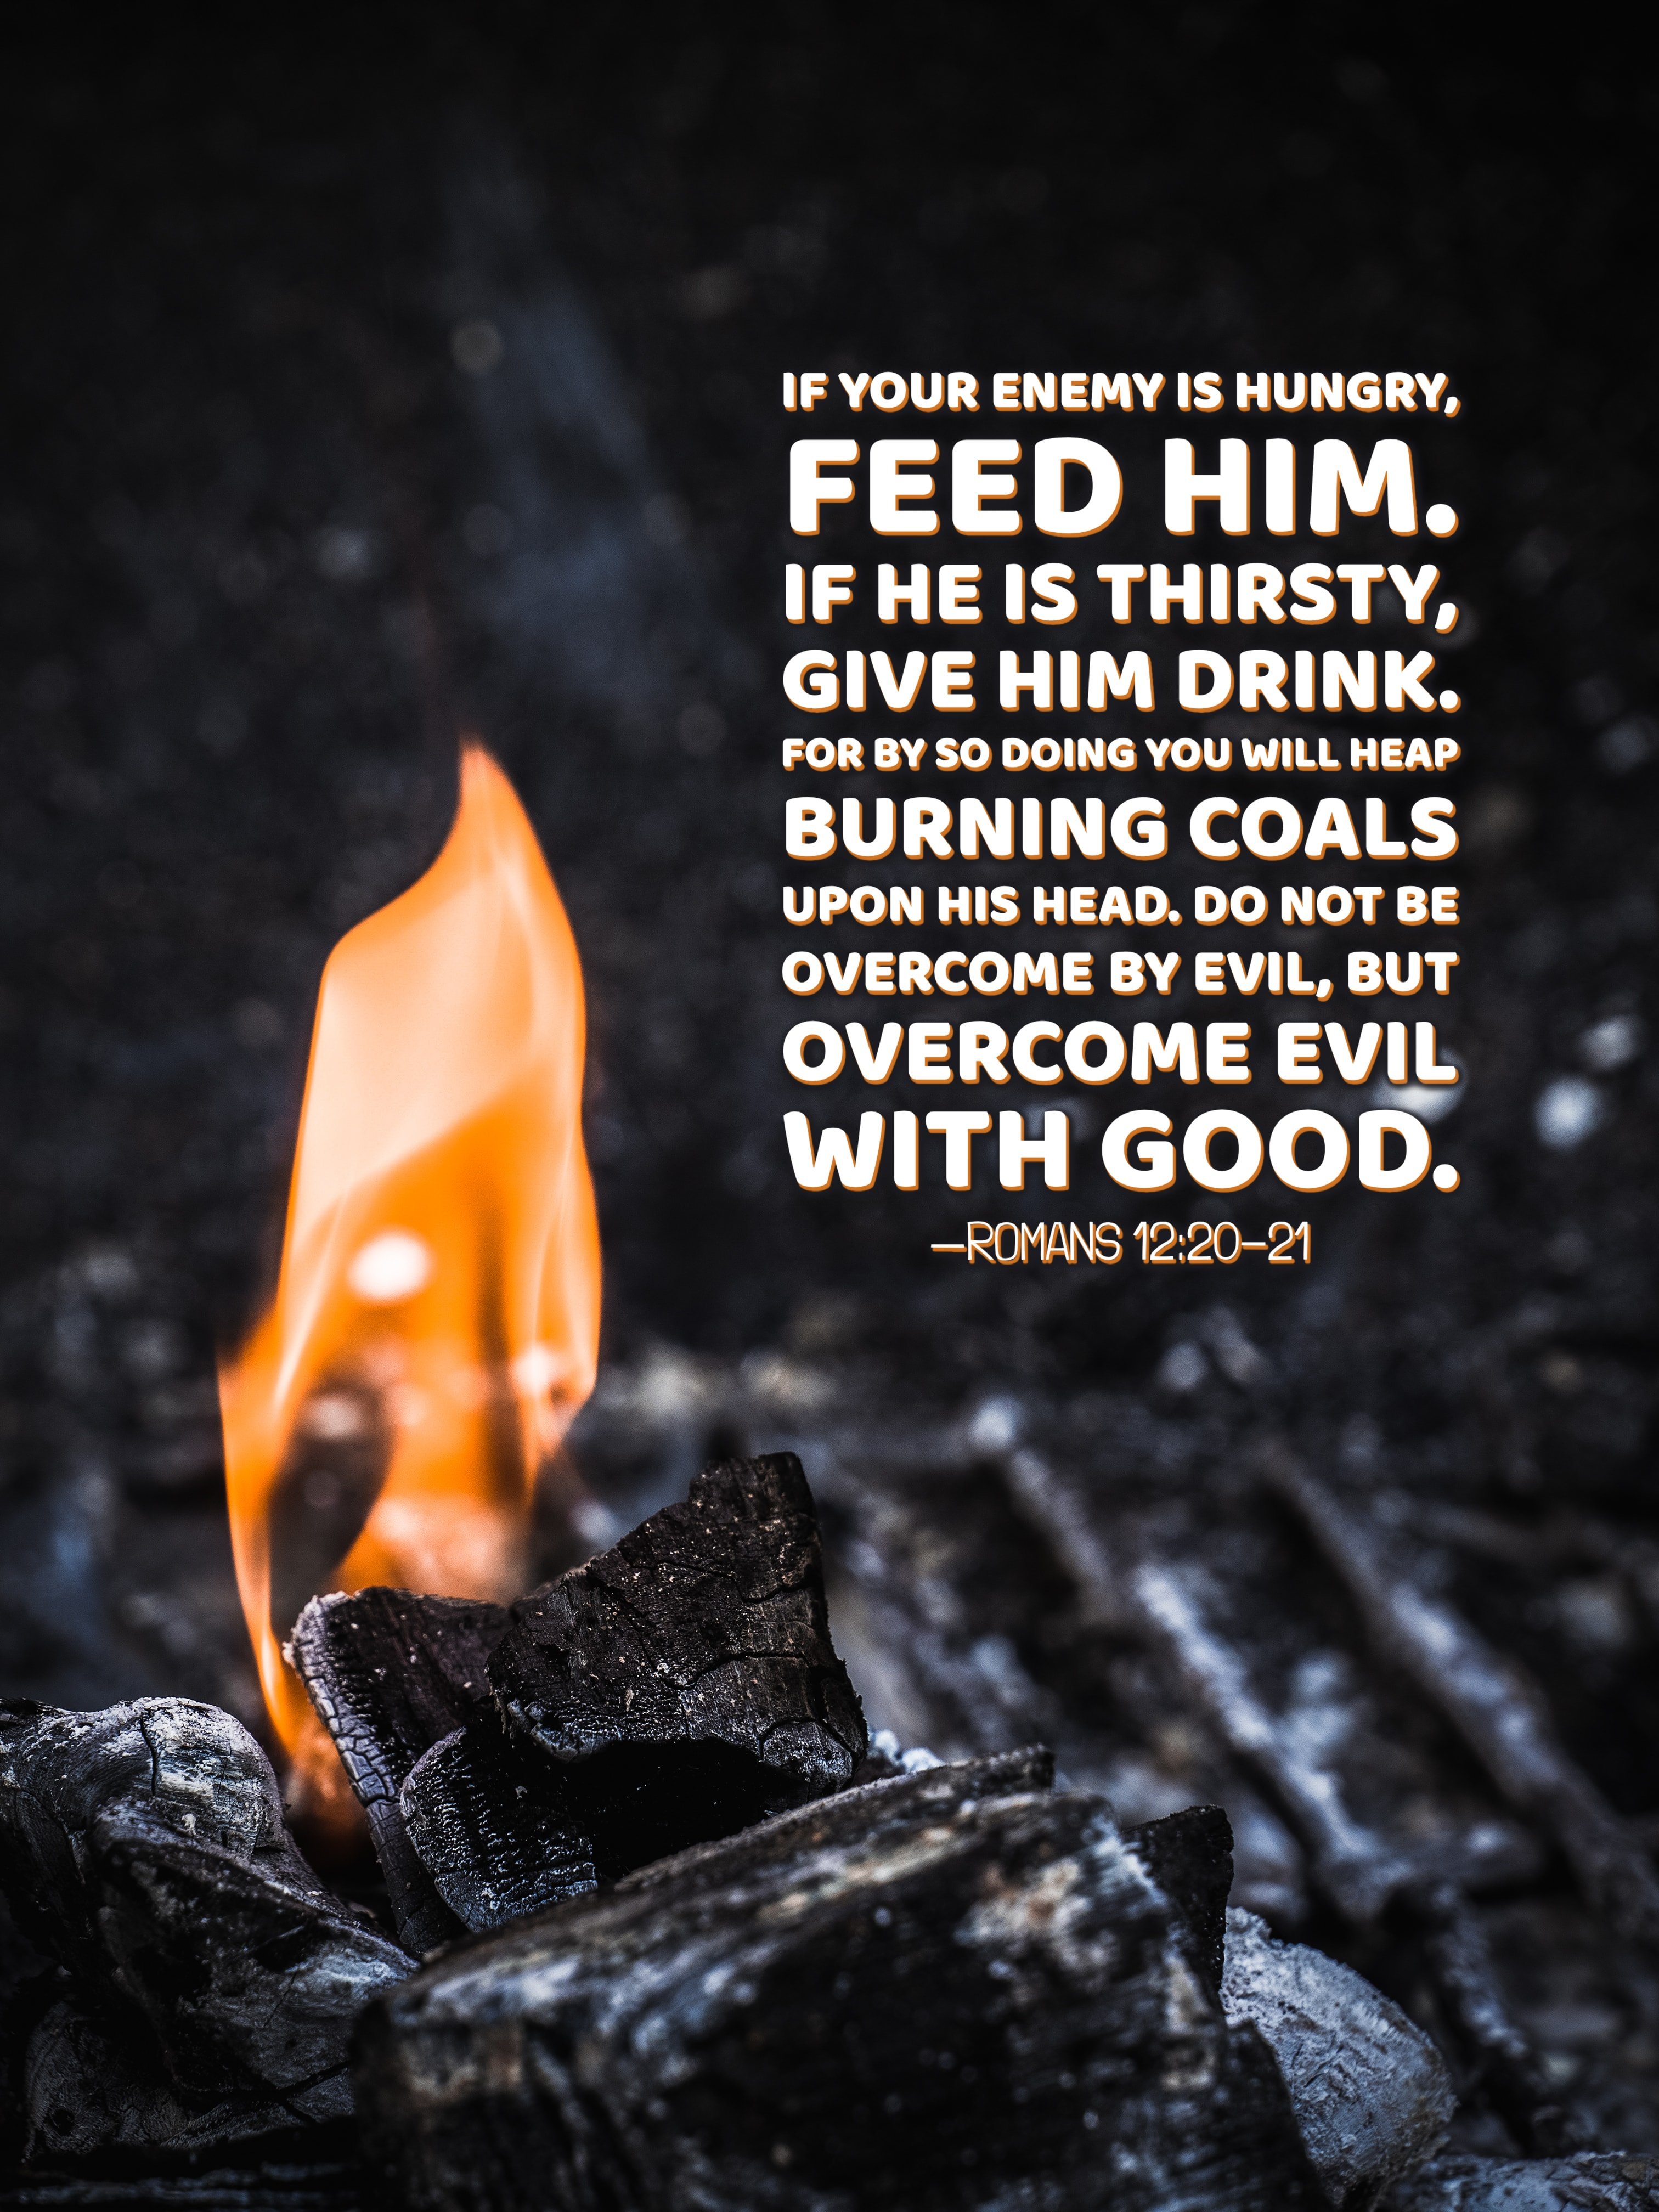 Burning Coals Overe Evil With Good Christian Wallpaper Quote